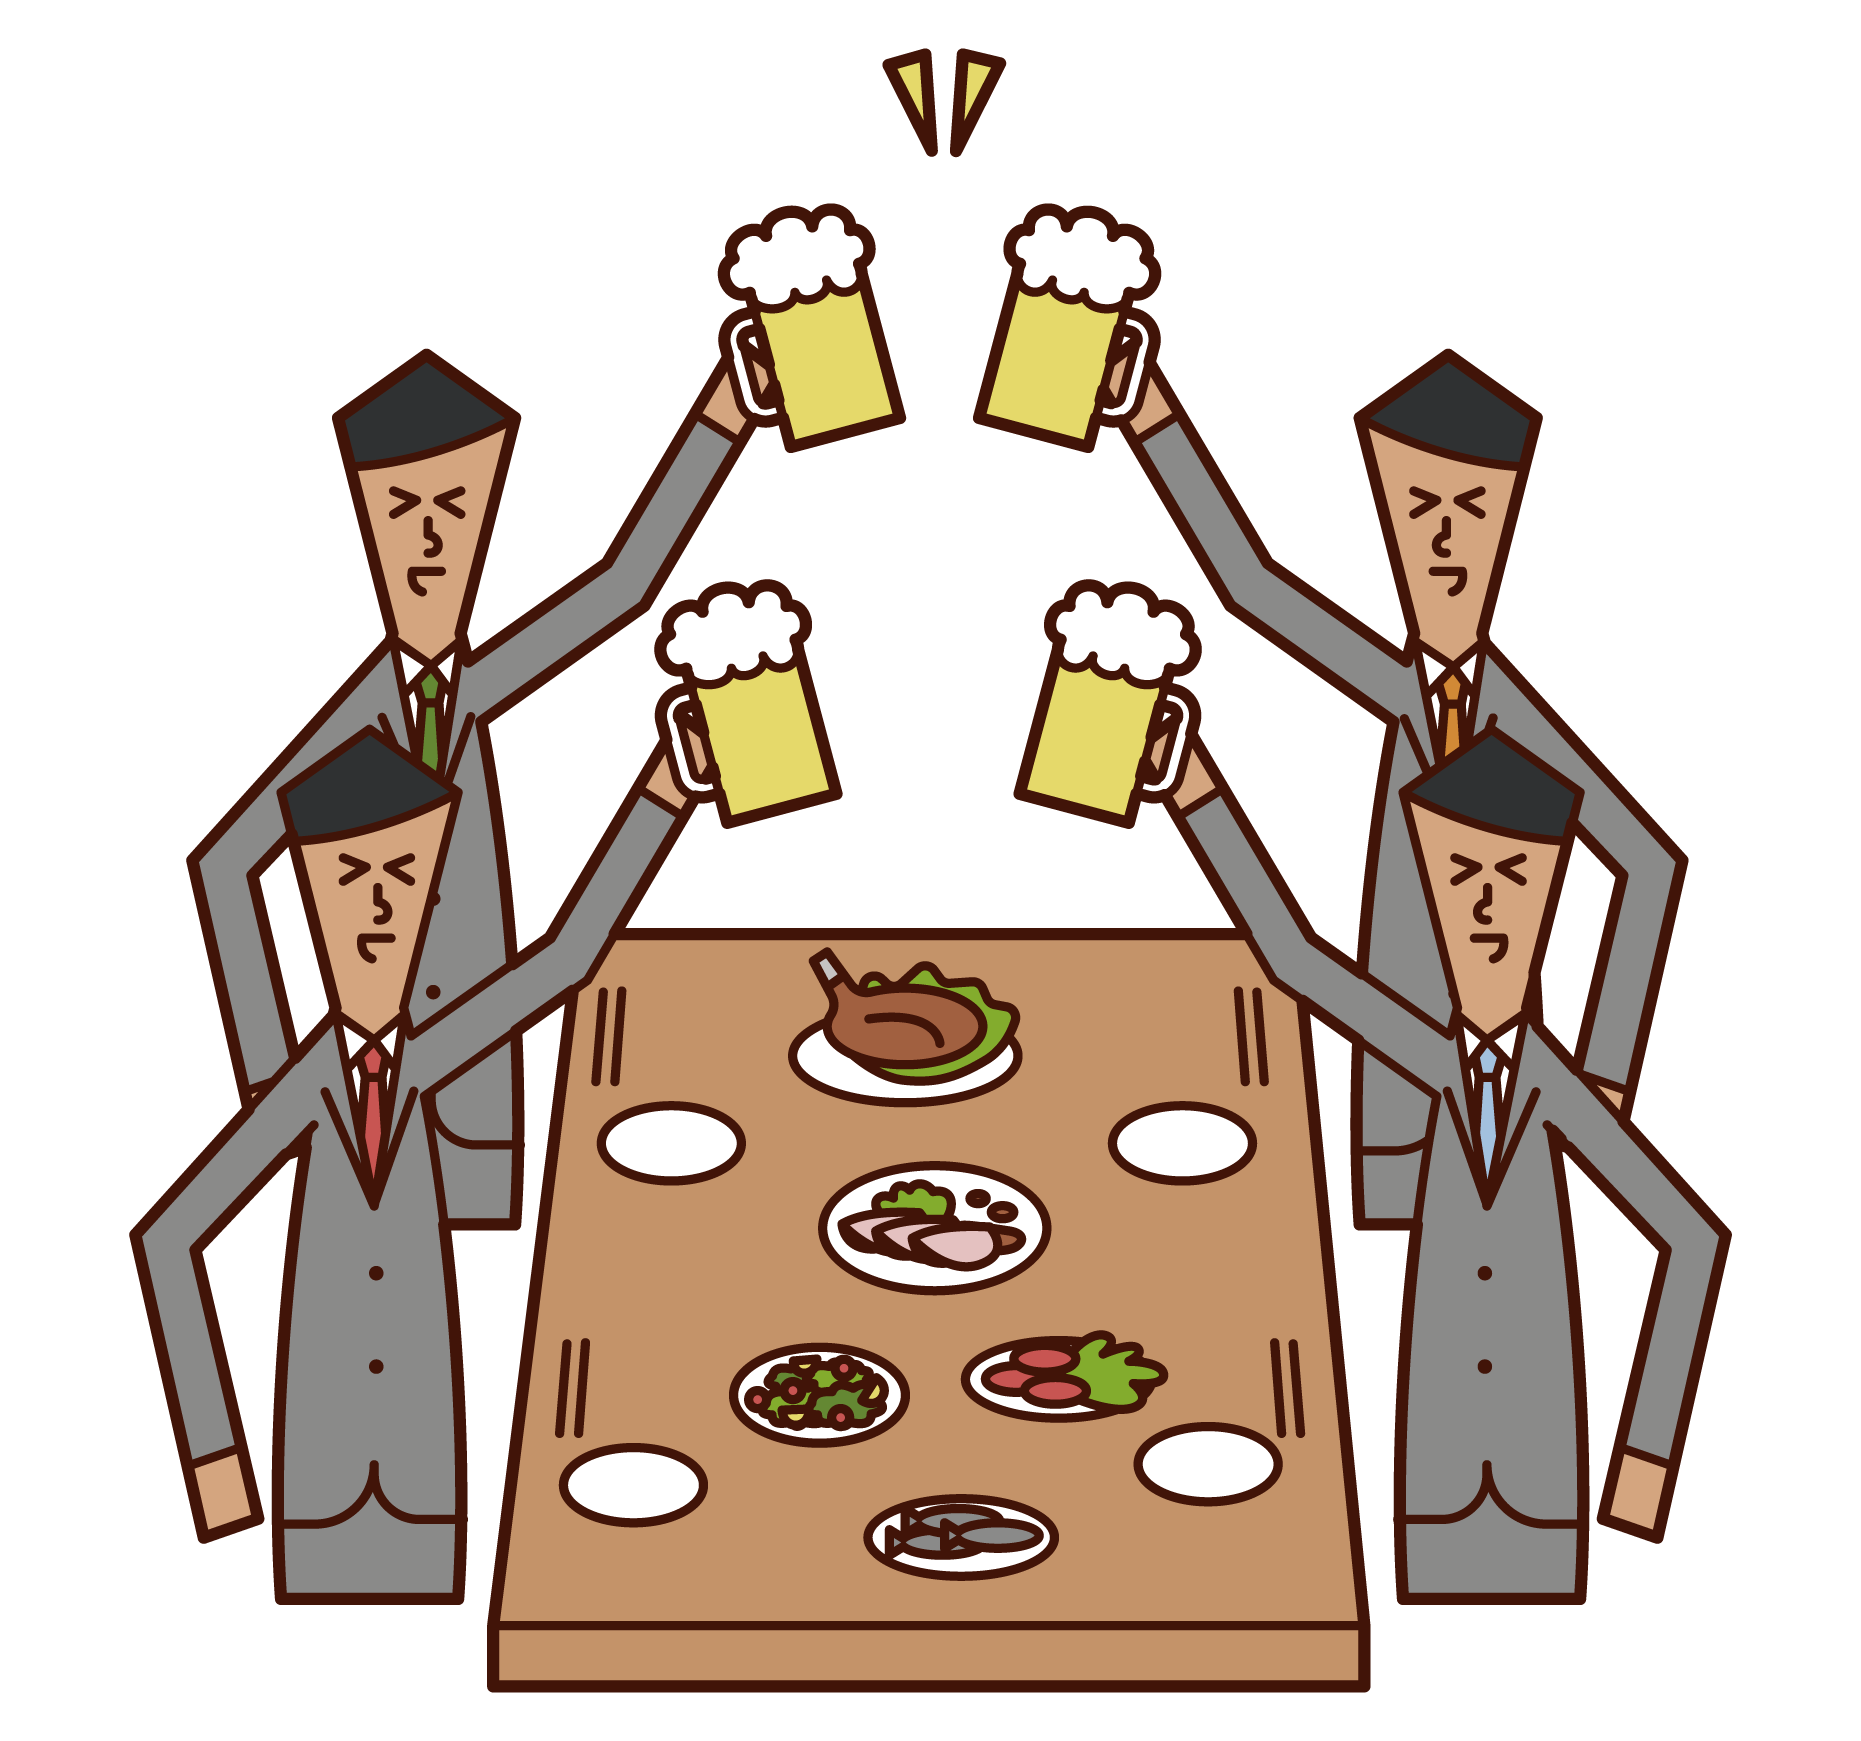 Illustration of people (men) toasting at a drinking party